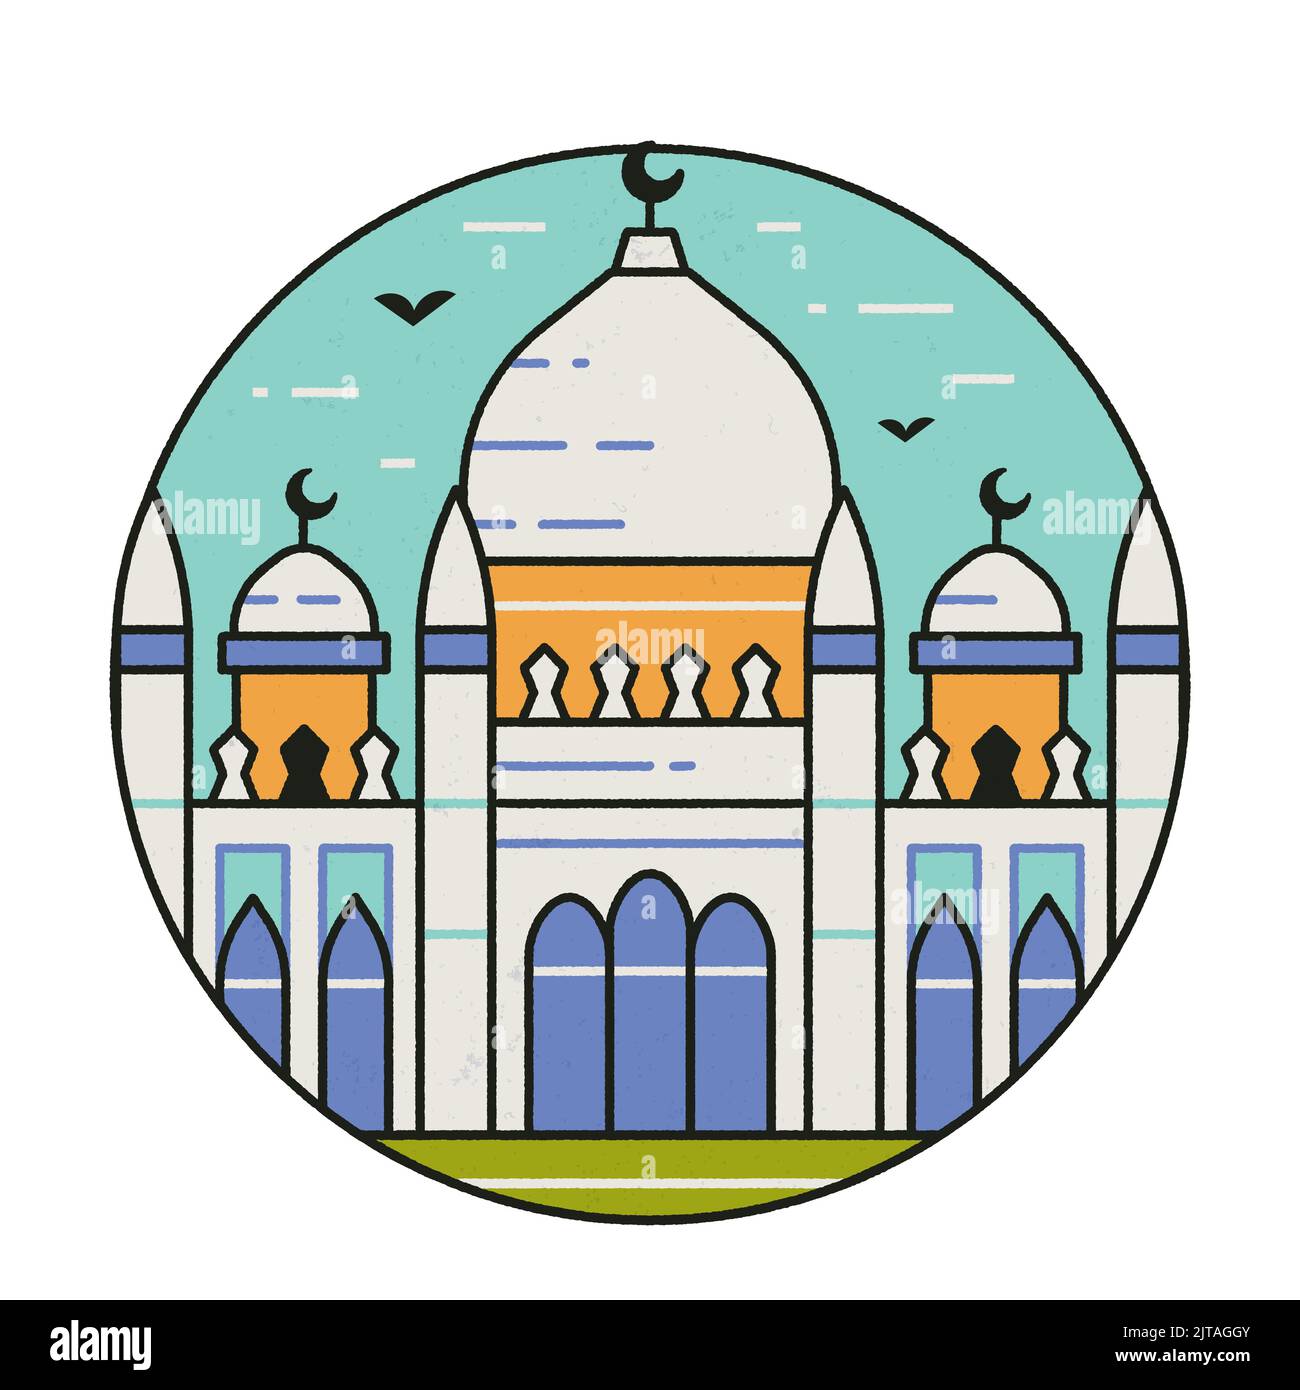 Muslim Mosque Center Circle Icon in Line Art Stock Vector